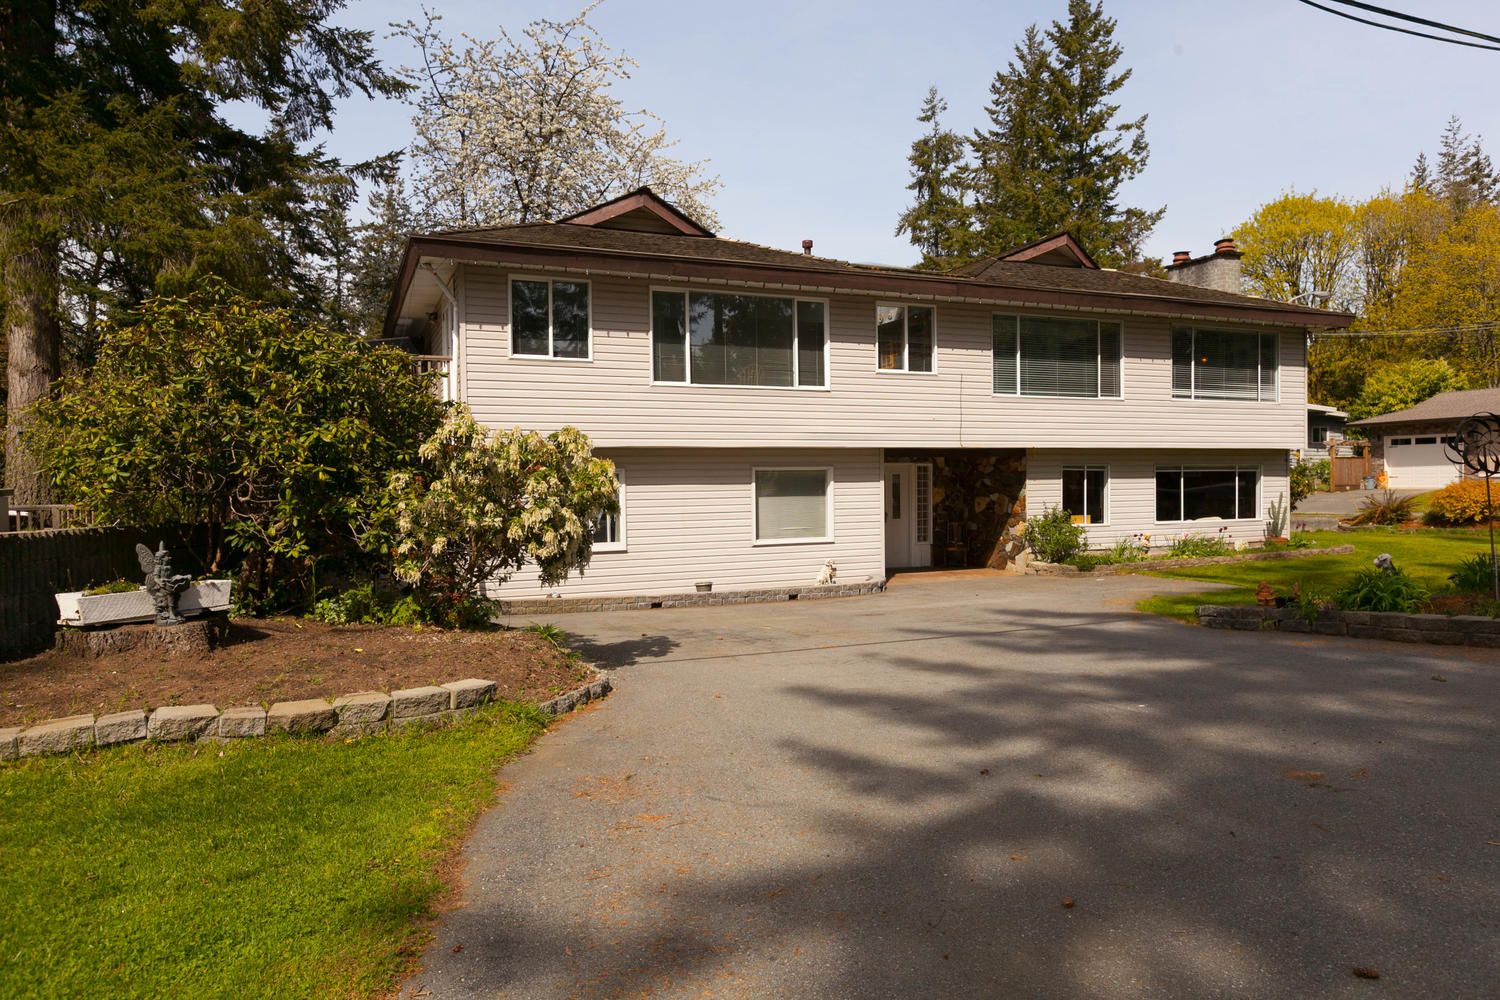 Main Photo: 19707 46 Avenue in Langley: Langley City House for sale : MLS®# R2261410